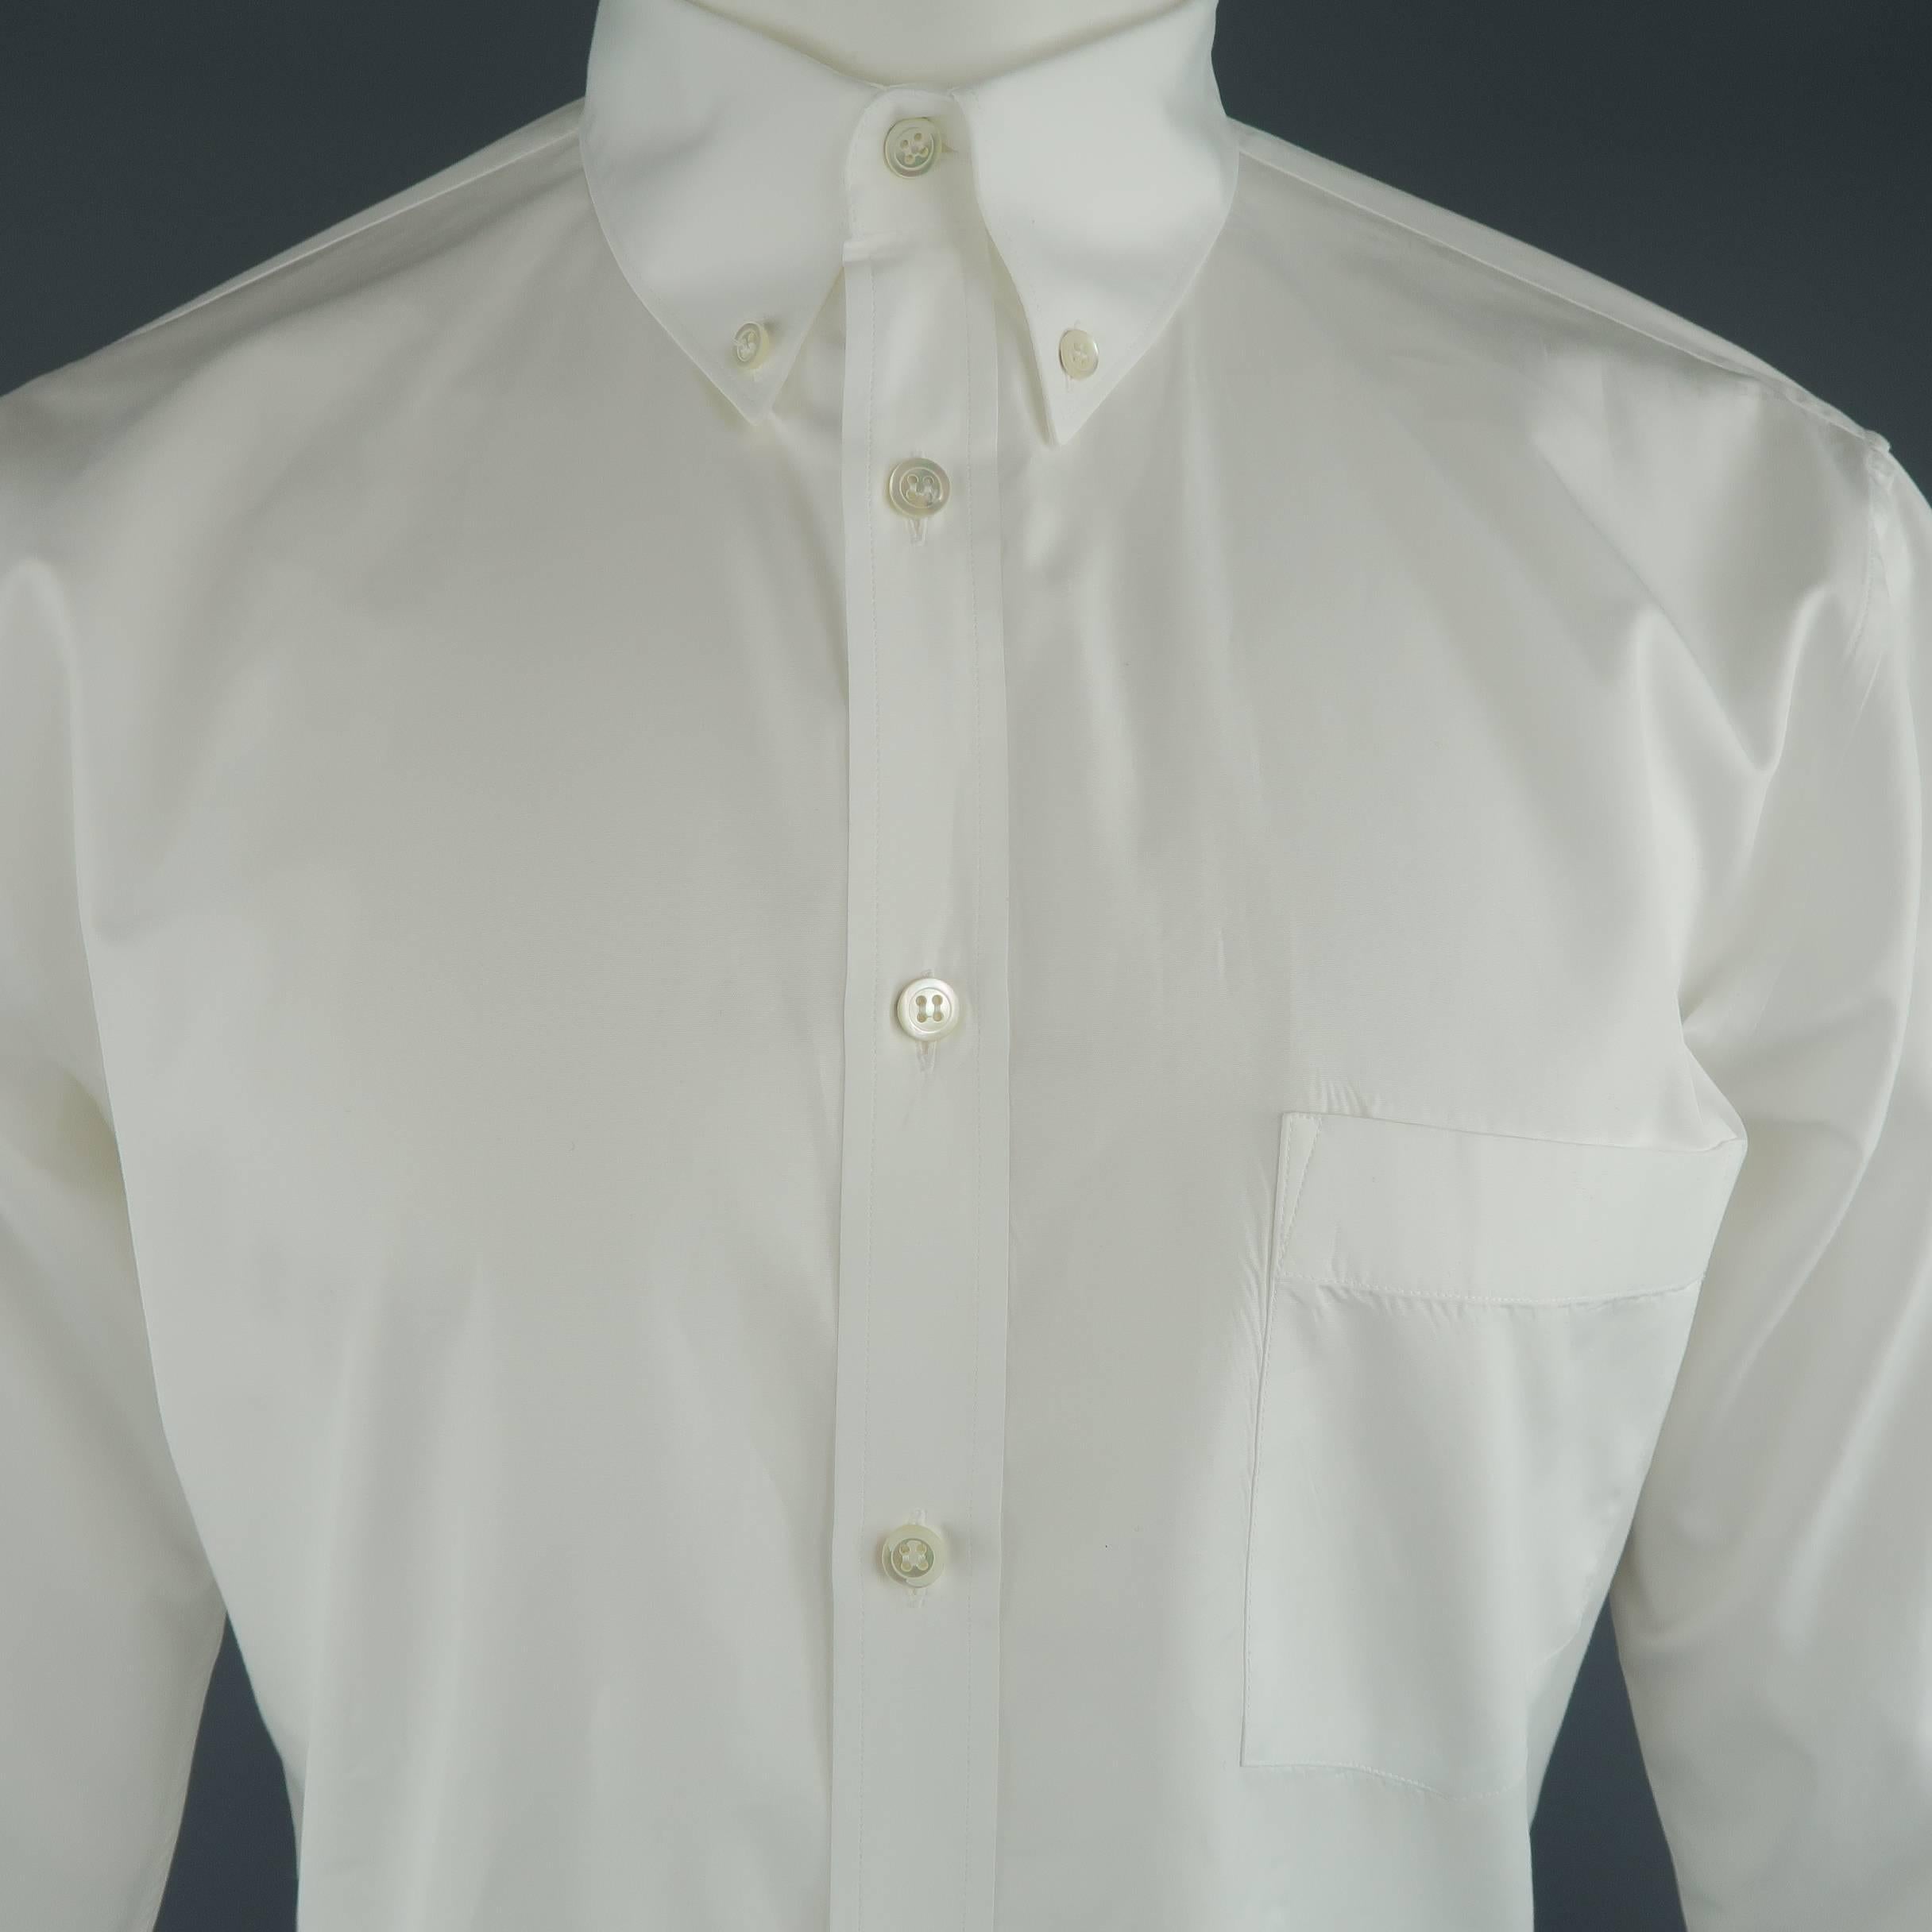 ALEXANDER MCQUEEN cotton dress shirt features a button down, pointed collar, skull logo embroidered cuff, and inner rolled cuff tab. Made in Romania.
 
Excellent Pre-Owned Condition.
Marked: IT 48
 
Measurements:
 
Shoulder: 18 in.
Chest: 44